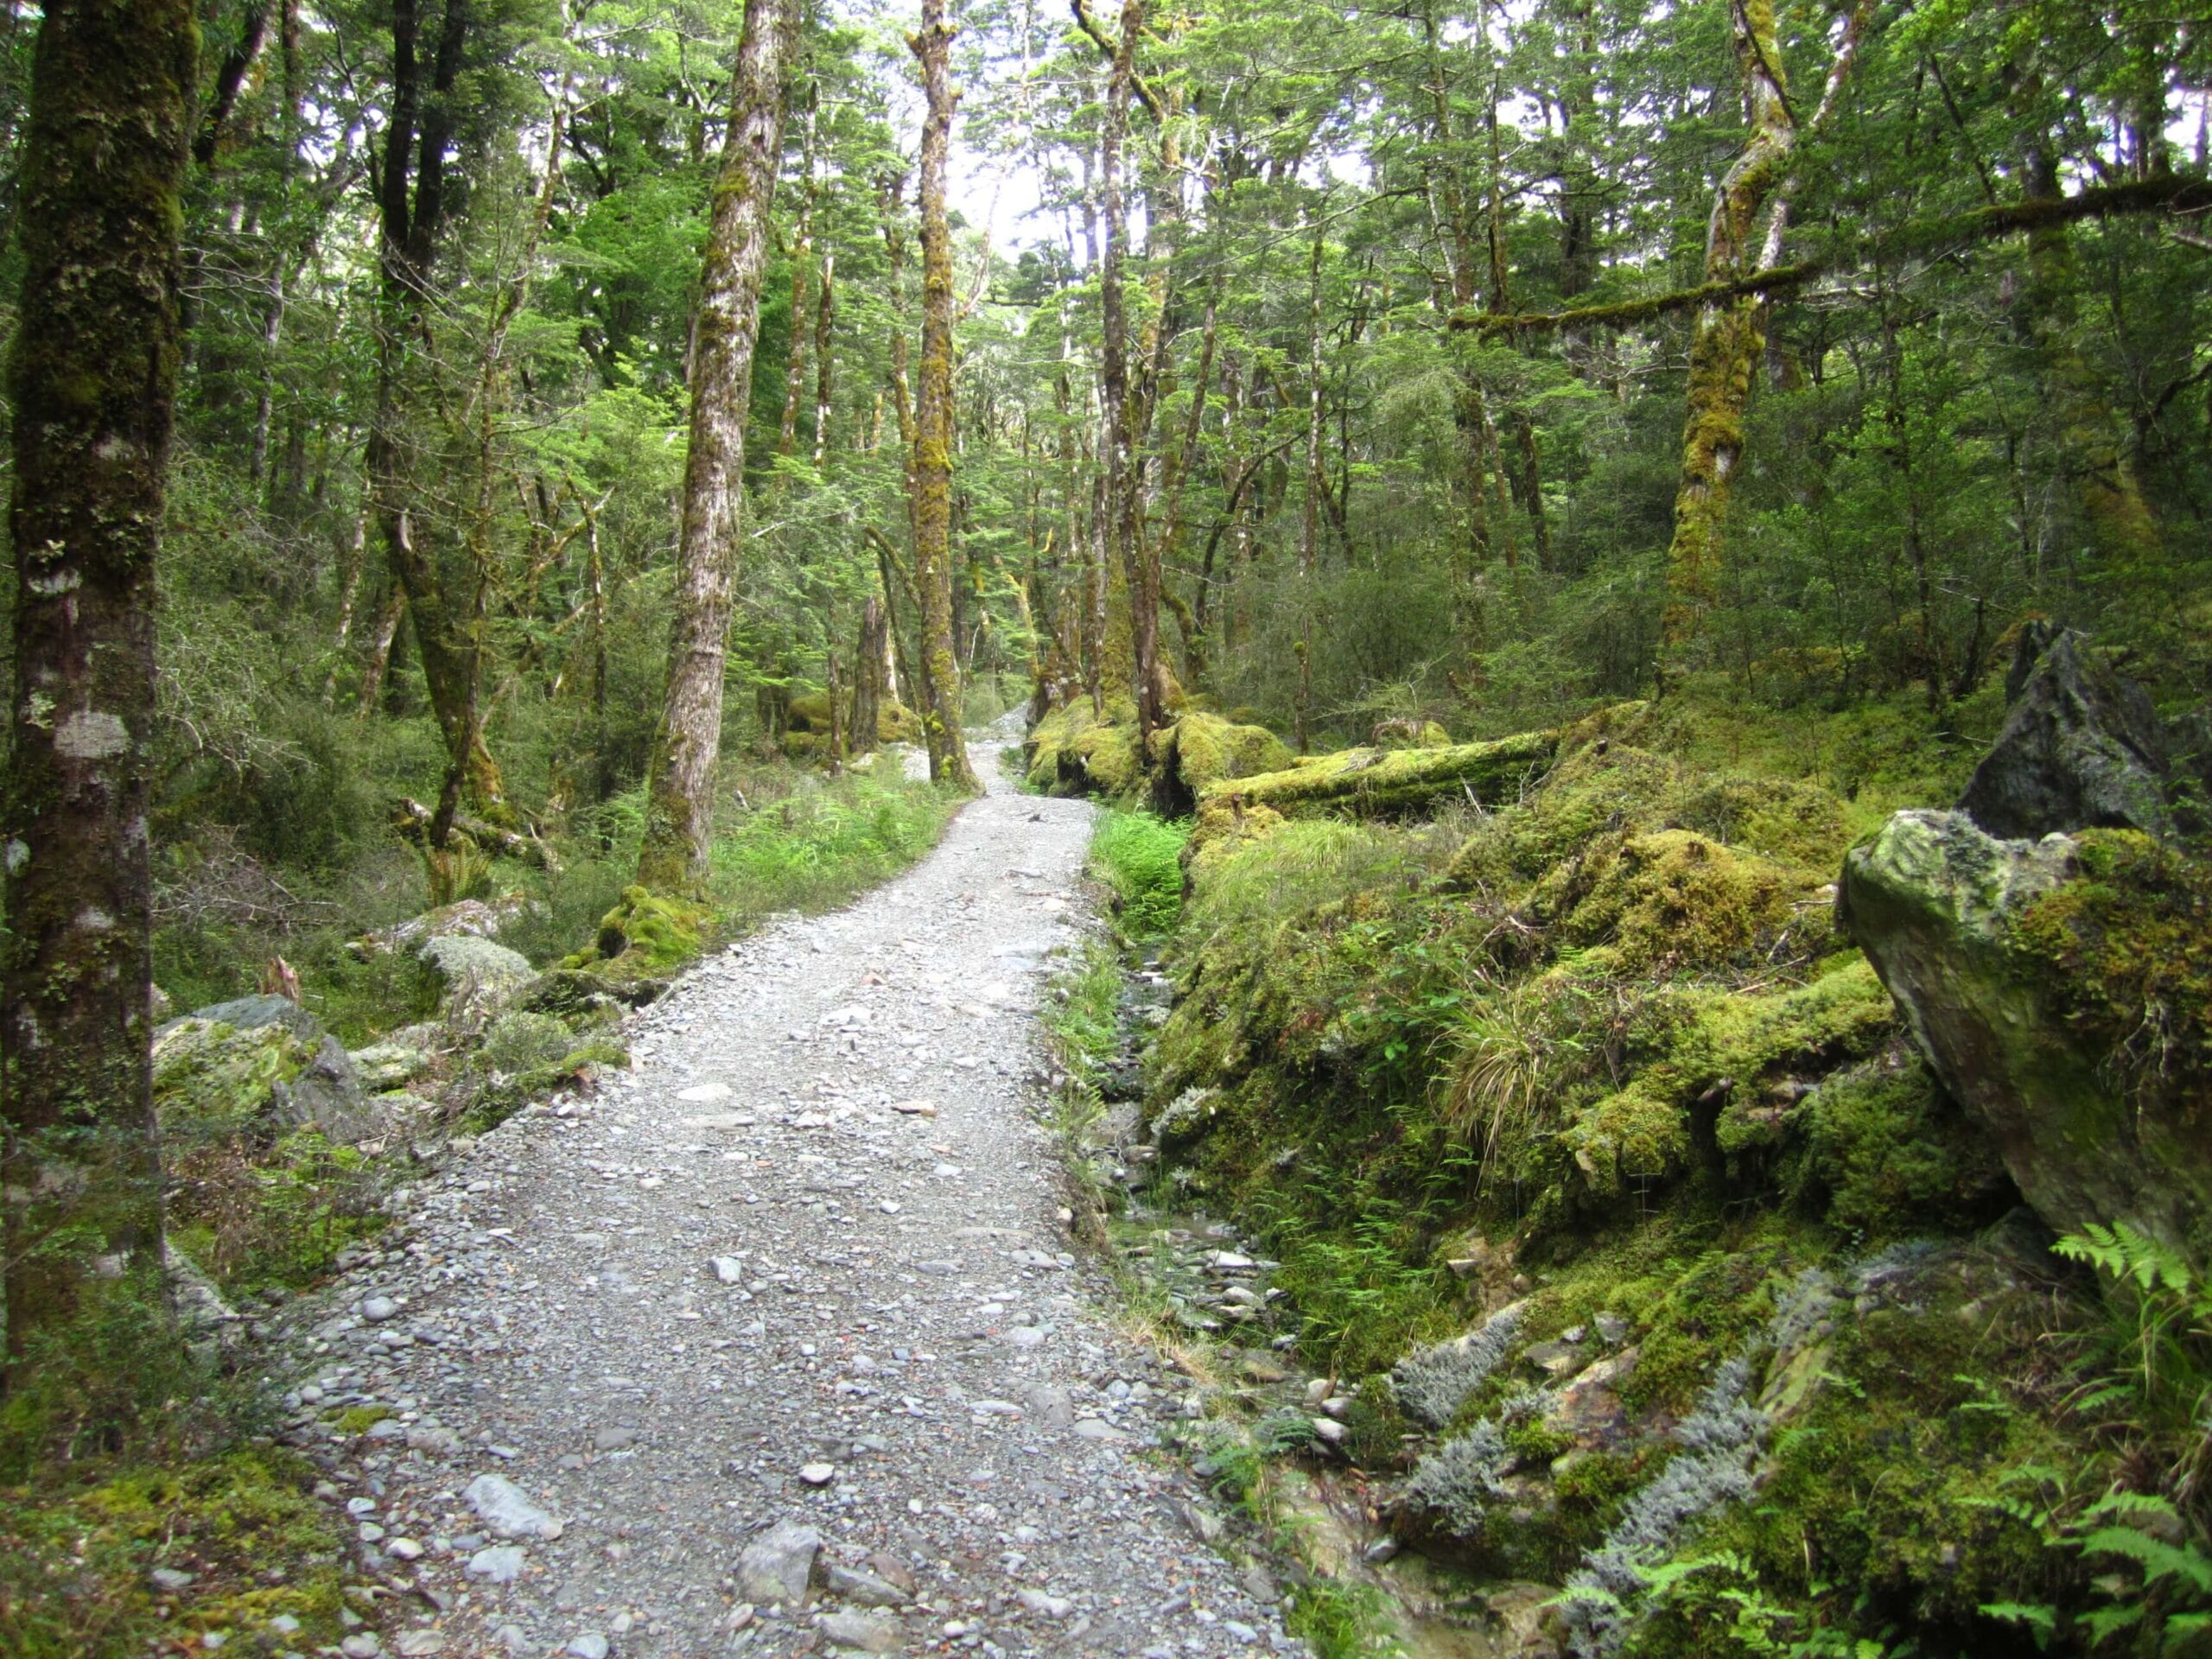 A paved path surrounded by a forrest - a good place to recover from nature deficit disorder